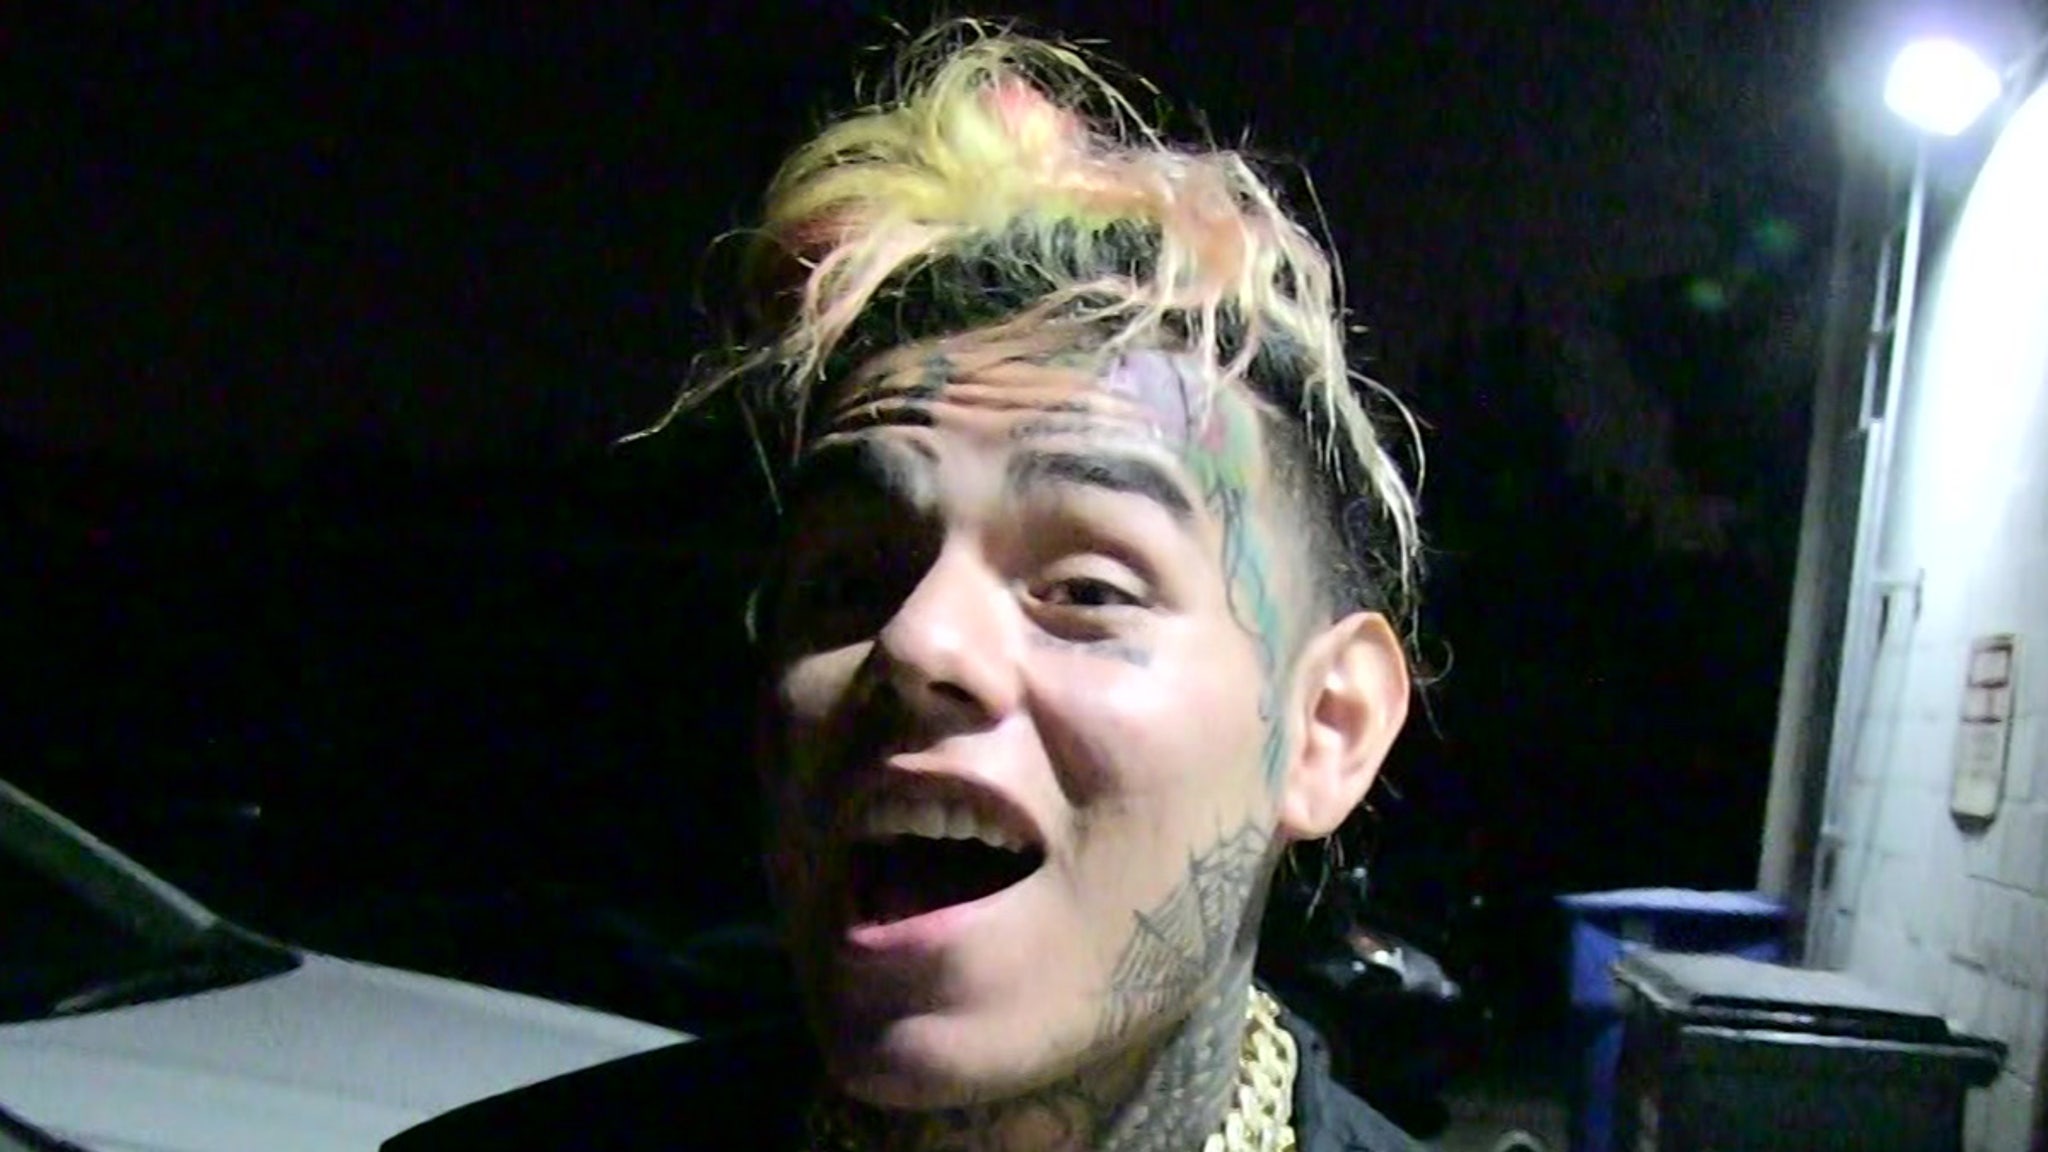 6ix9ine Nears End Of House Arrest Eyes Safe Living And New Music